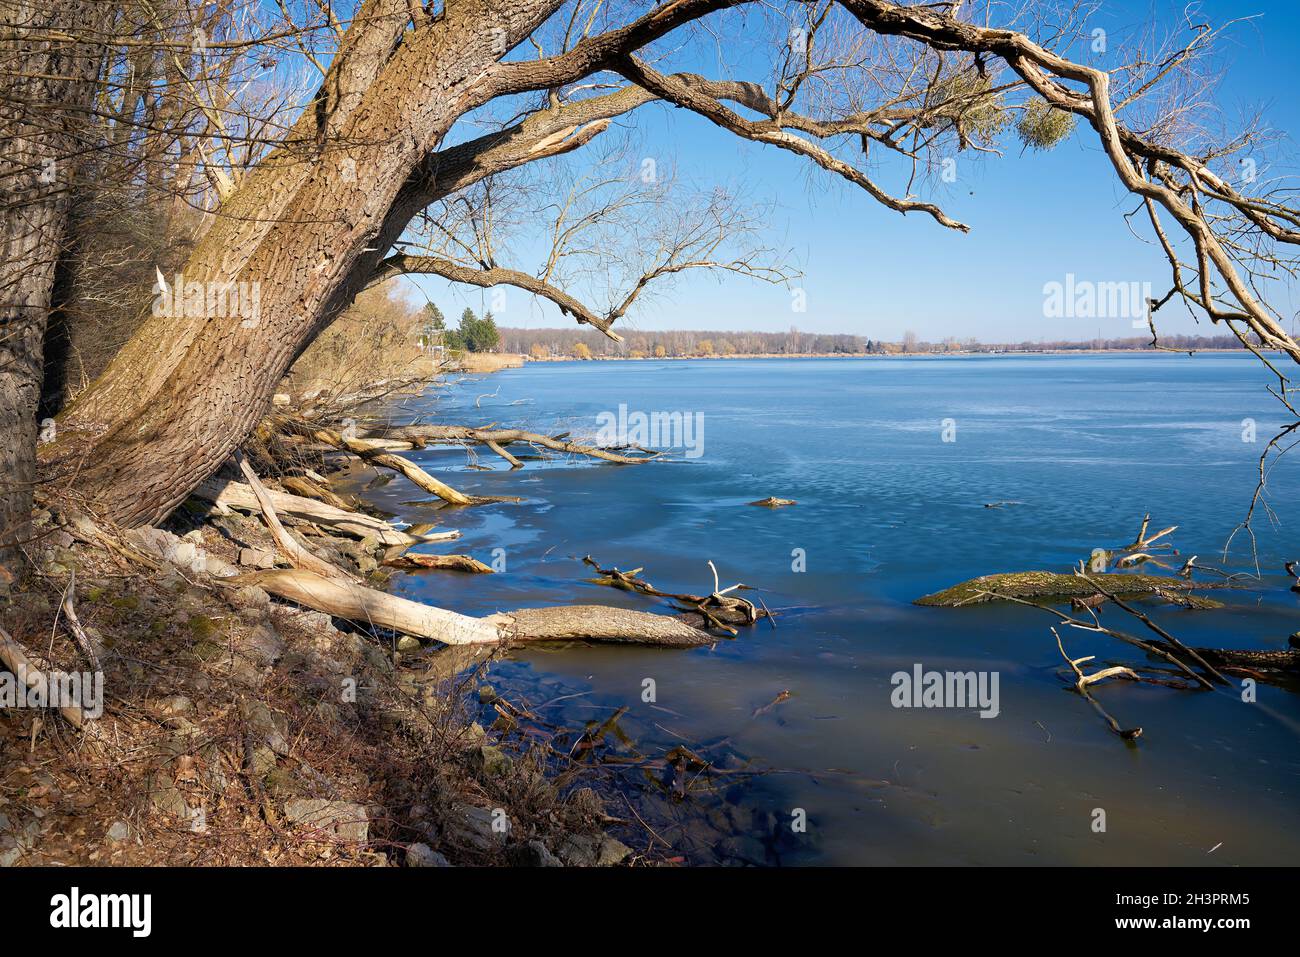 Melting ice at the end of winter at the Lake Barleber See near Magdeburg in Germany Stock Photo